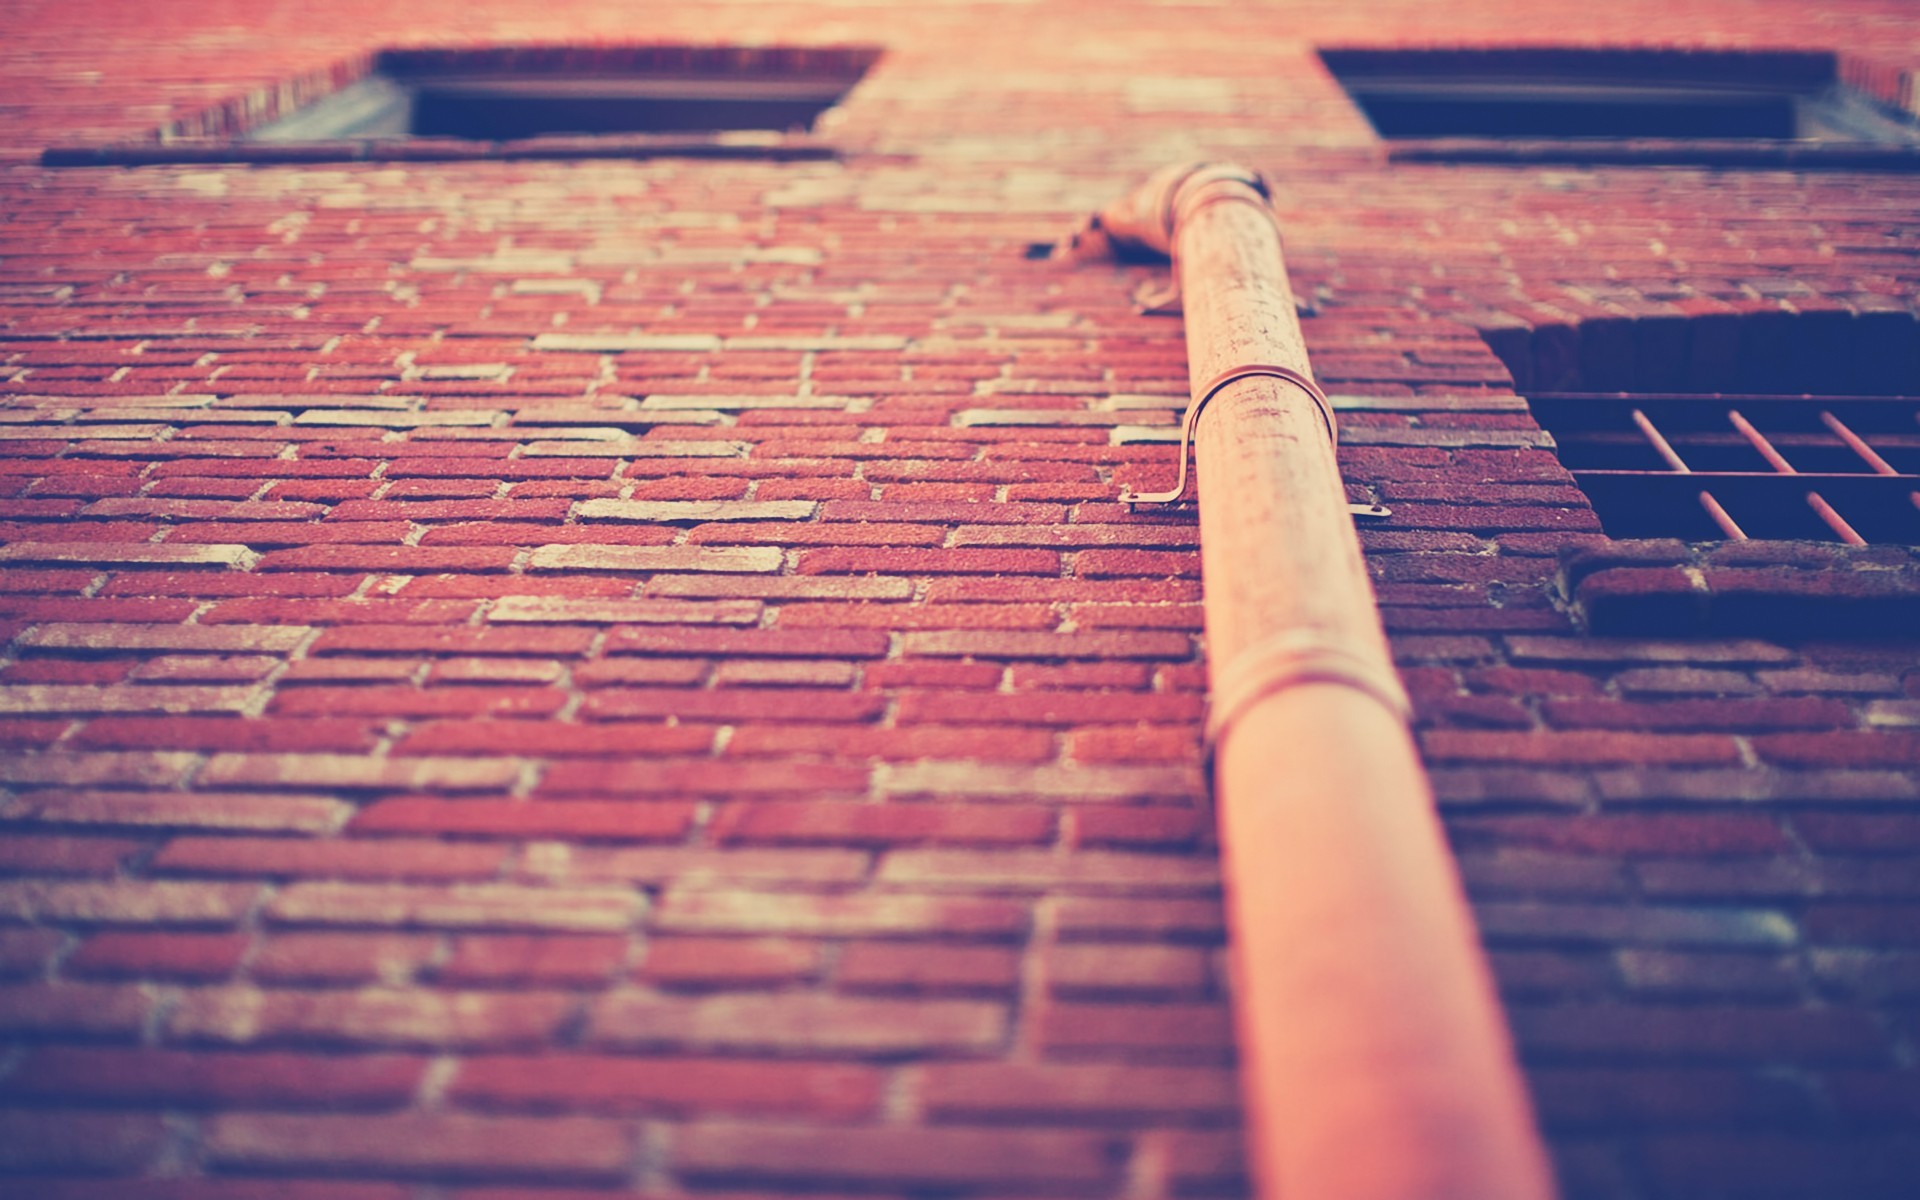 General 1920x1200 bricks architecture window worm's eye view warm colors wall building low-angle DeviantArt